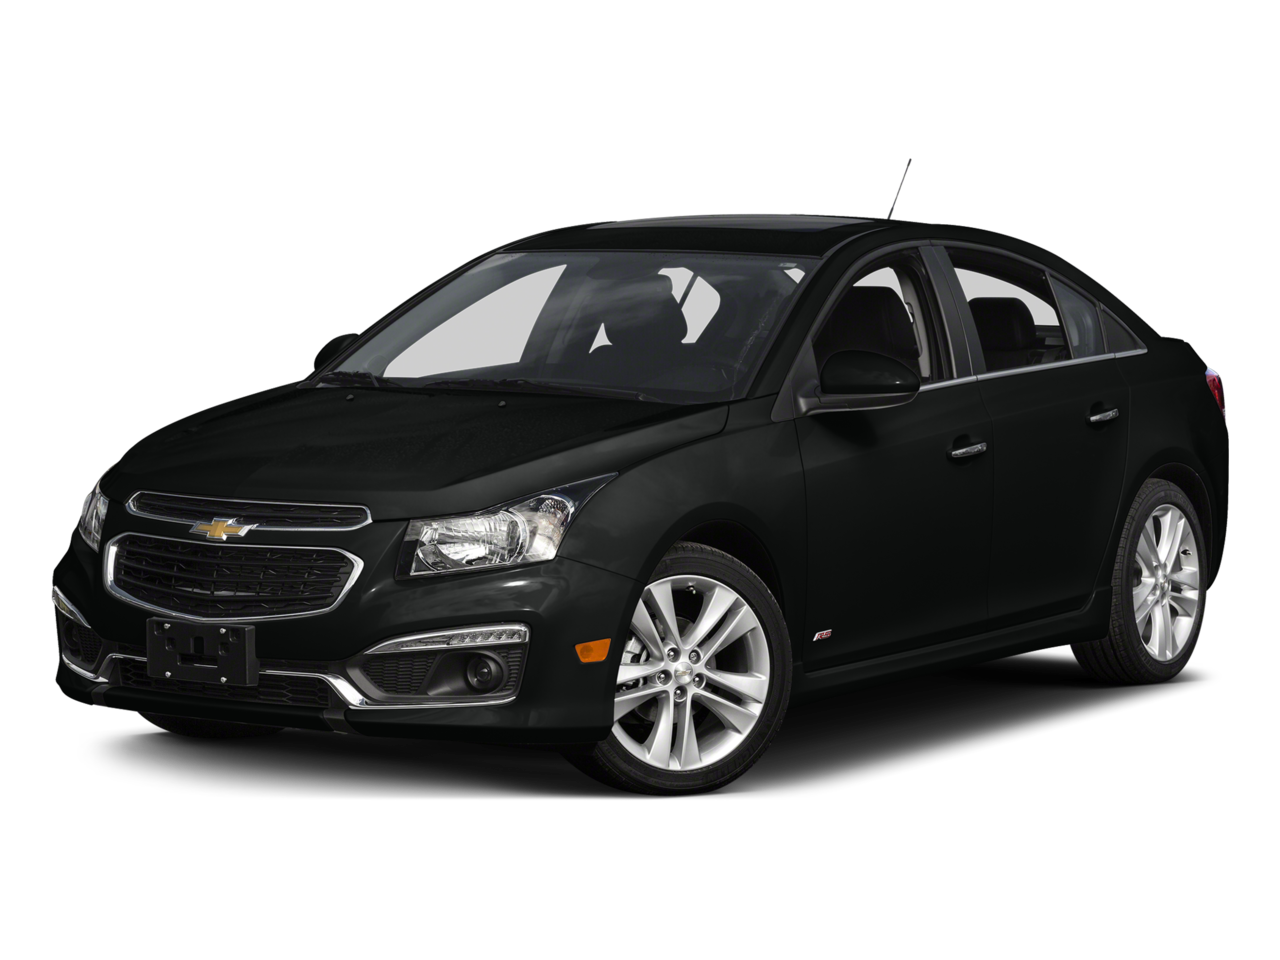 2015 Chevrolet Cruze Repair: Service and Maintenance Cost